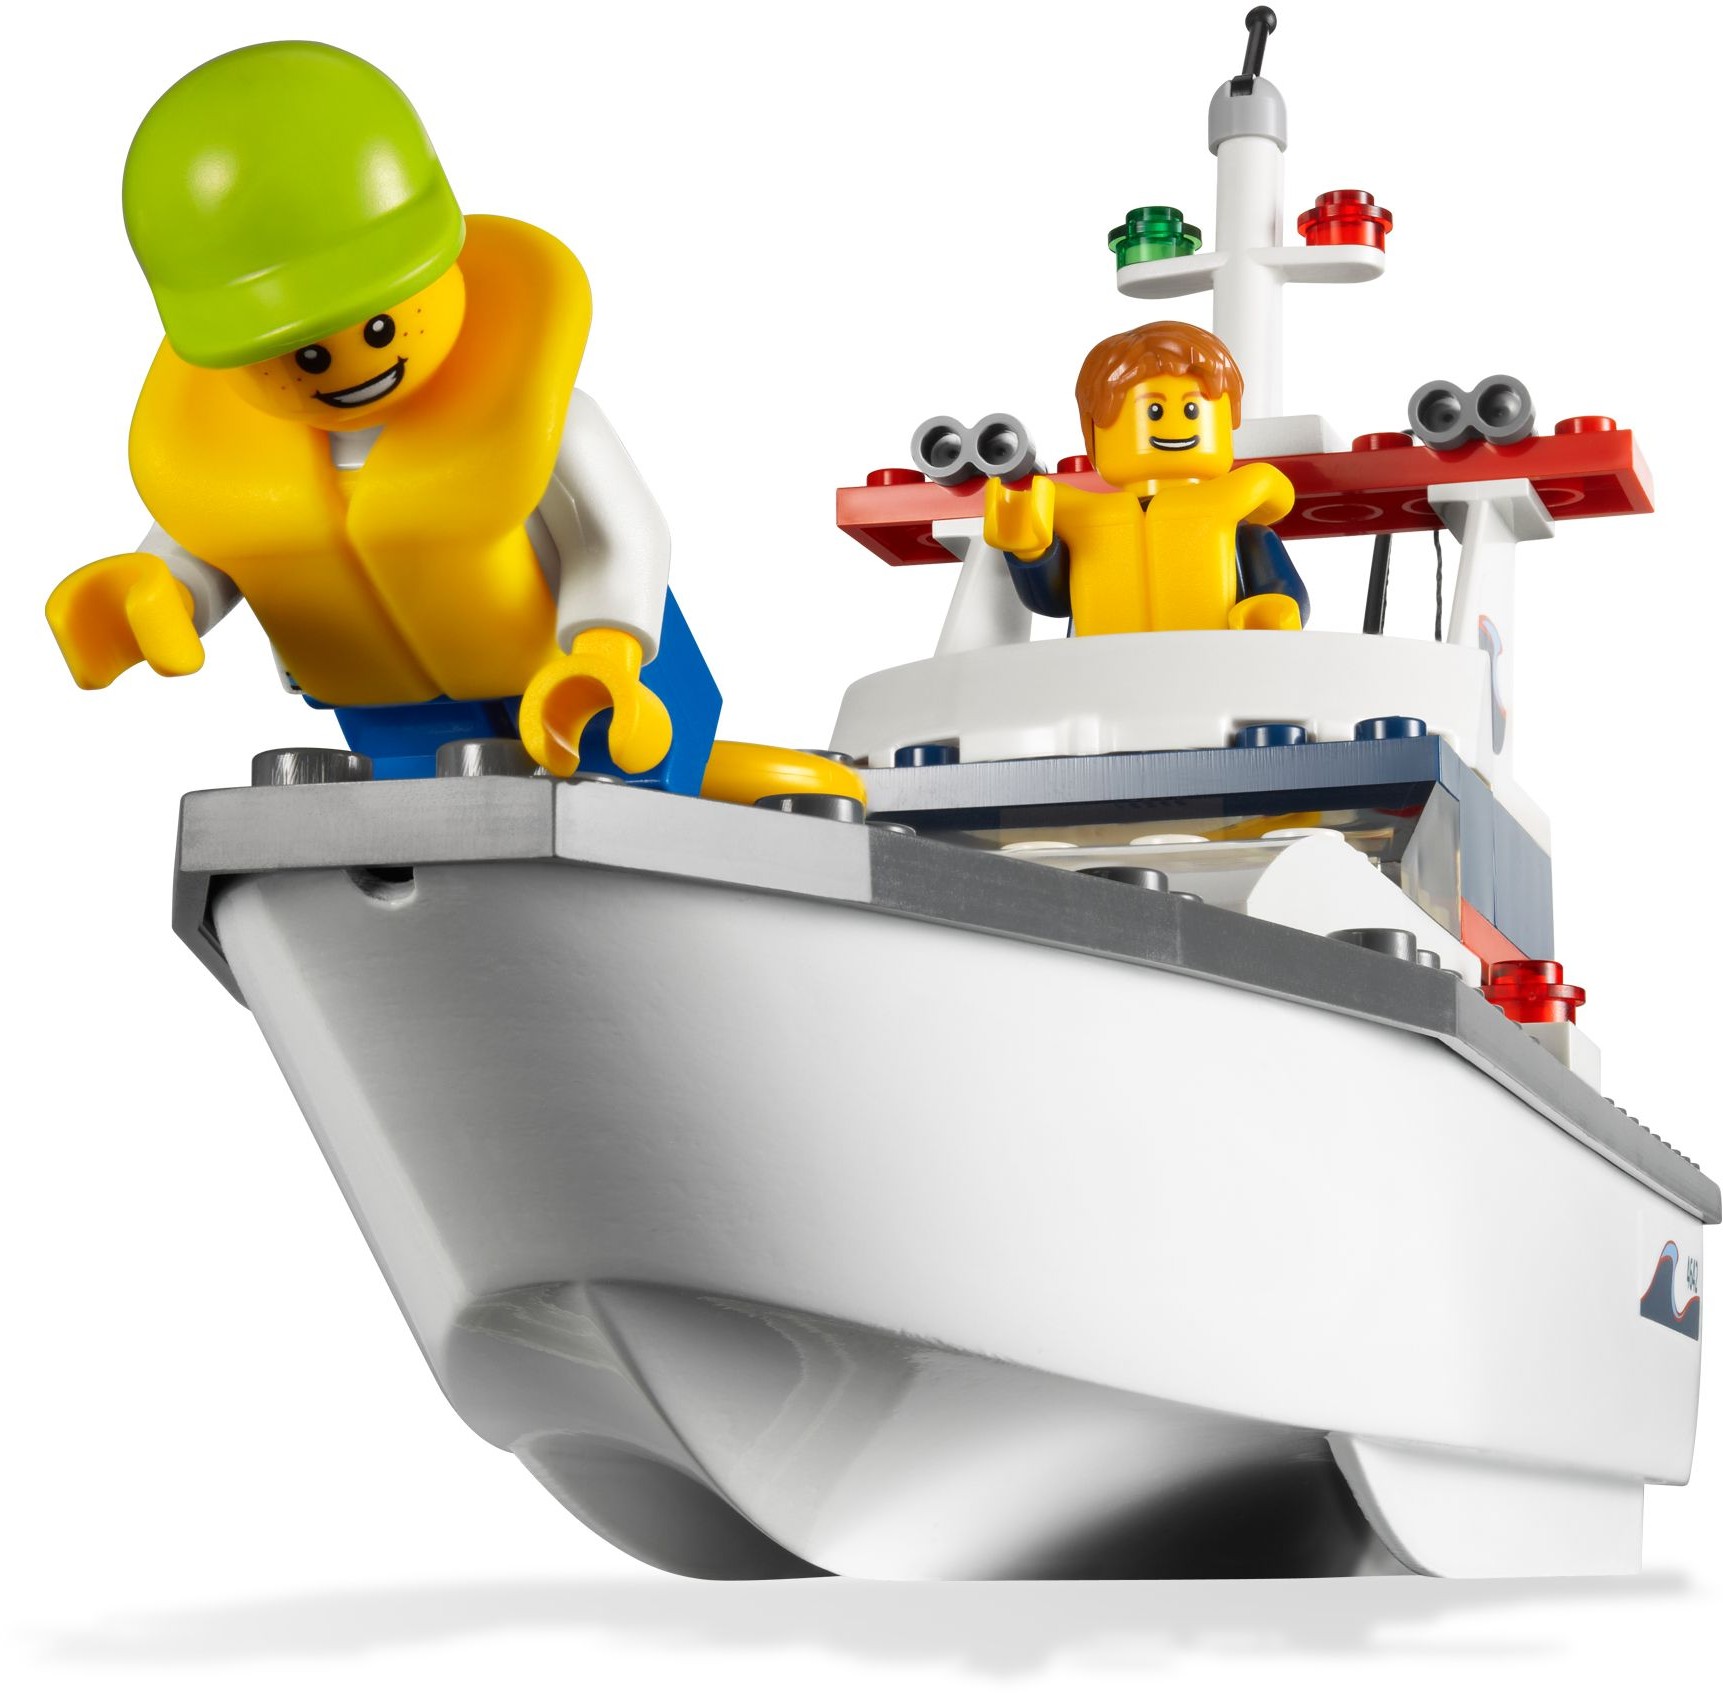 Lego 4642 Fishing Boat - Lego City set for sale best price